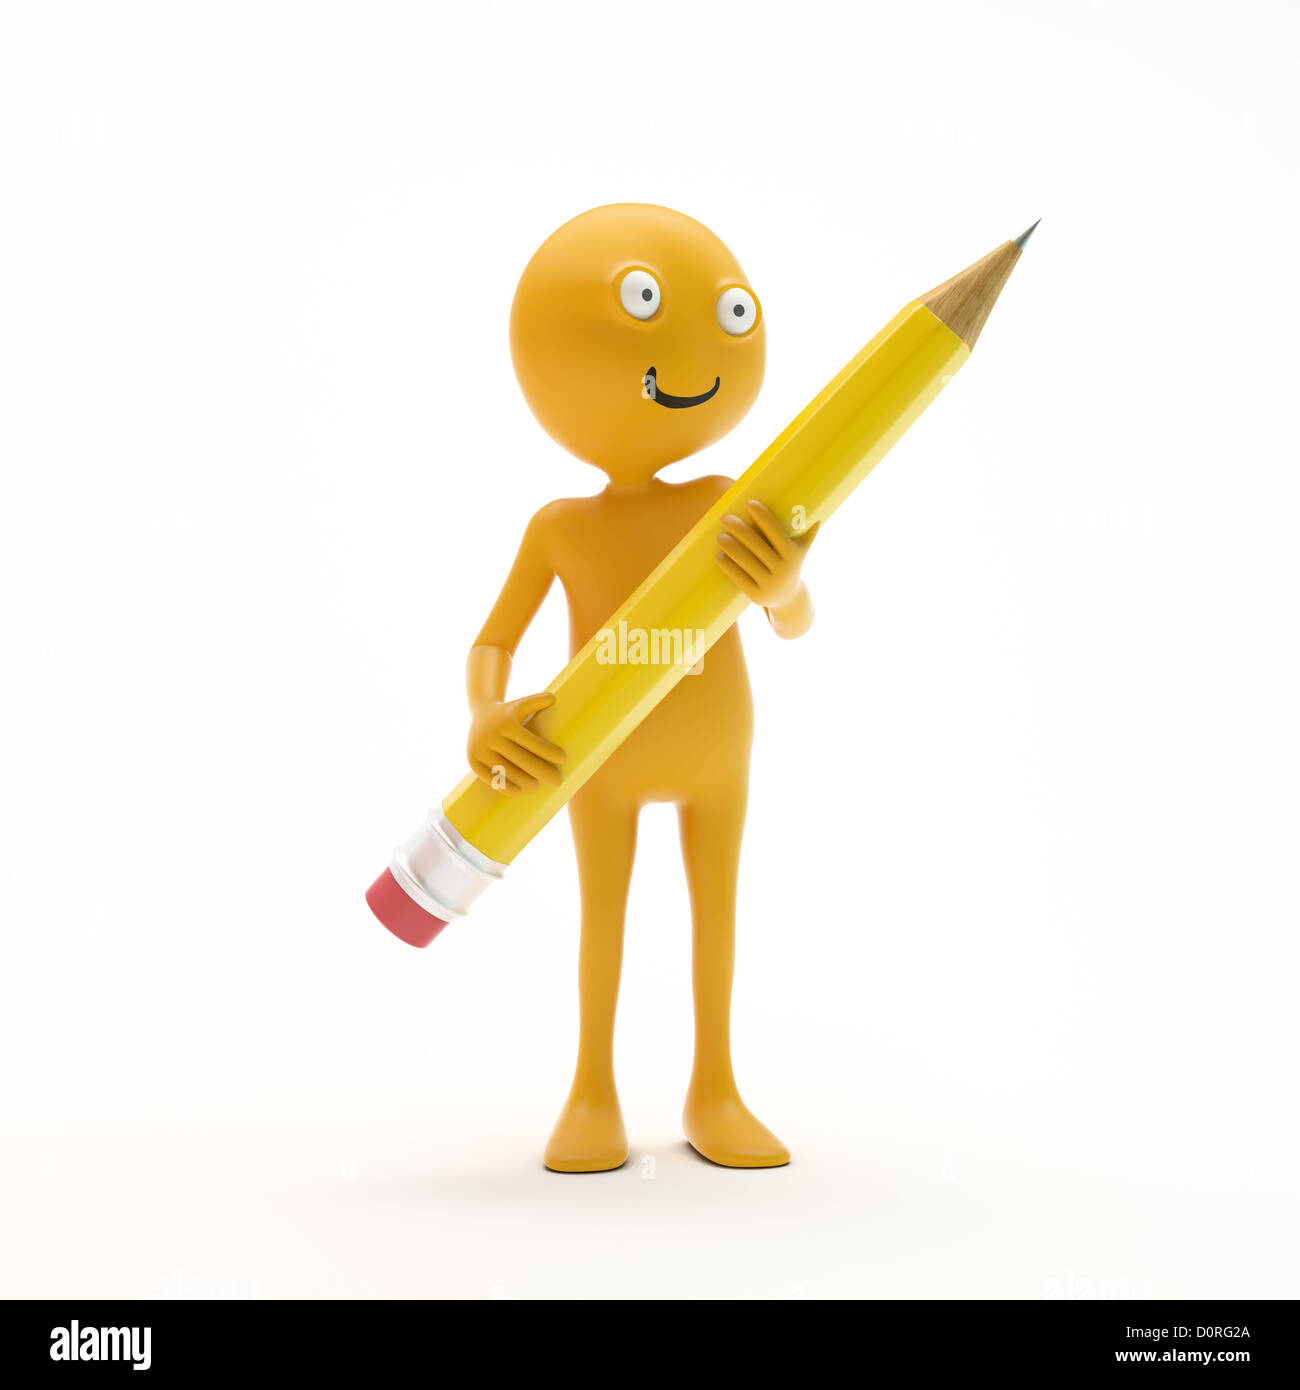 Smiley holding a pencil Stock Photo